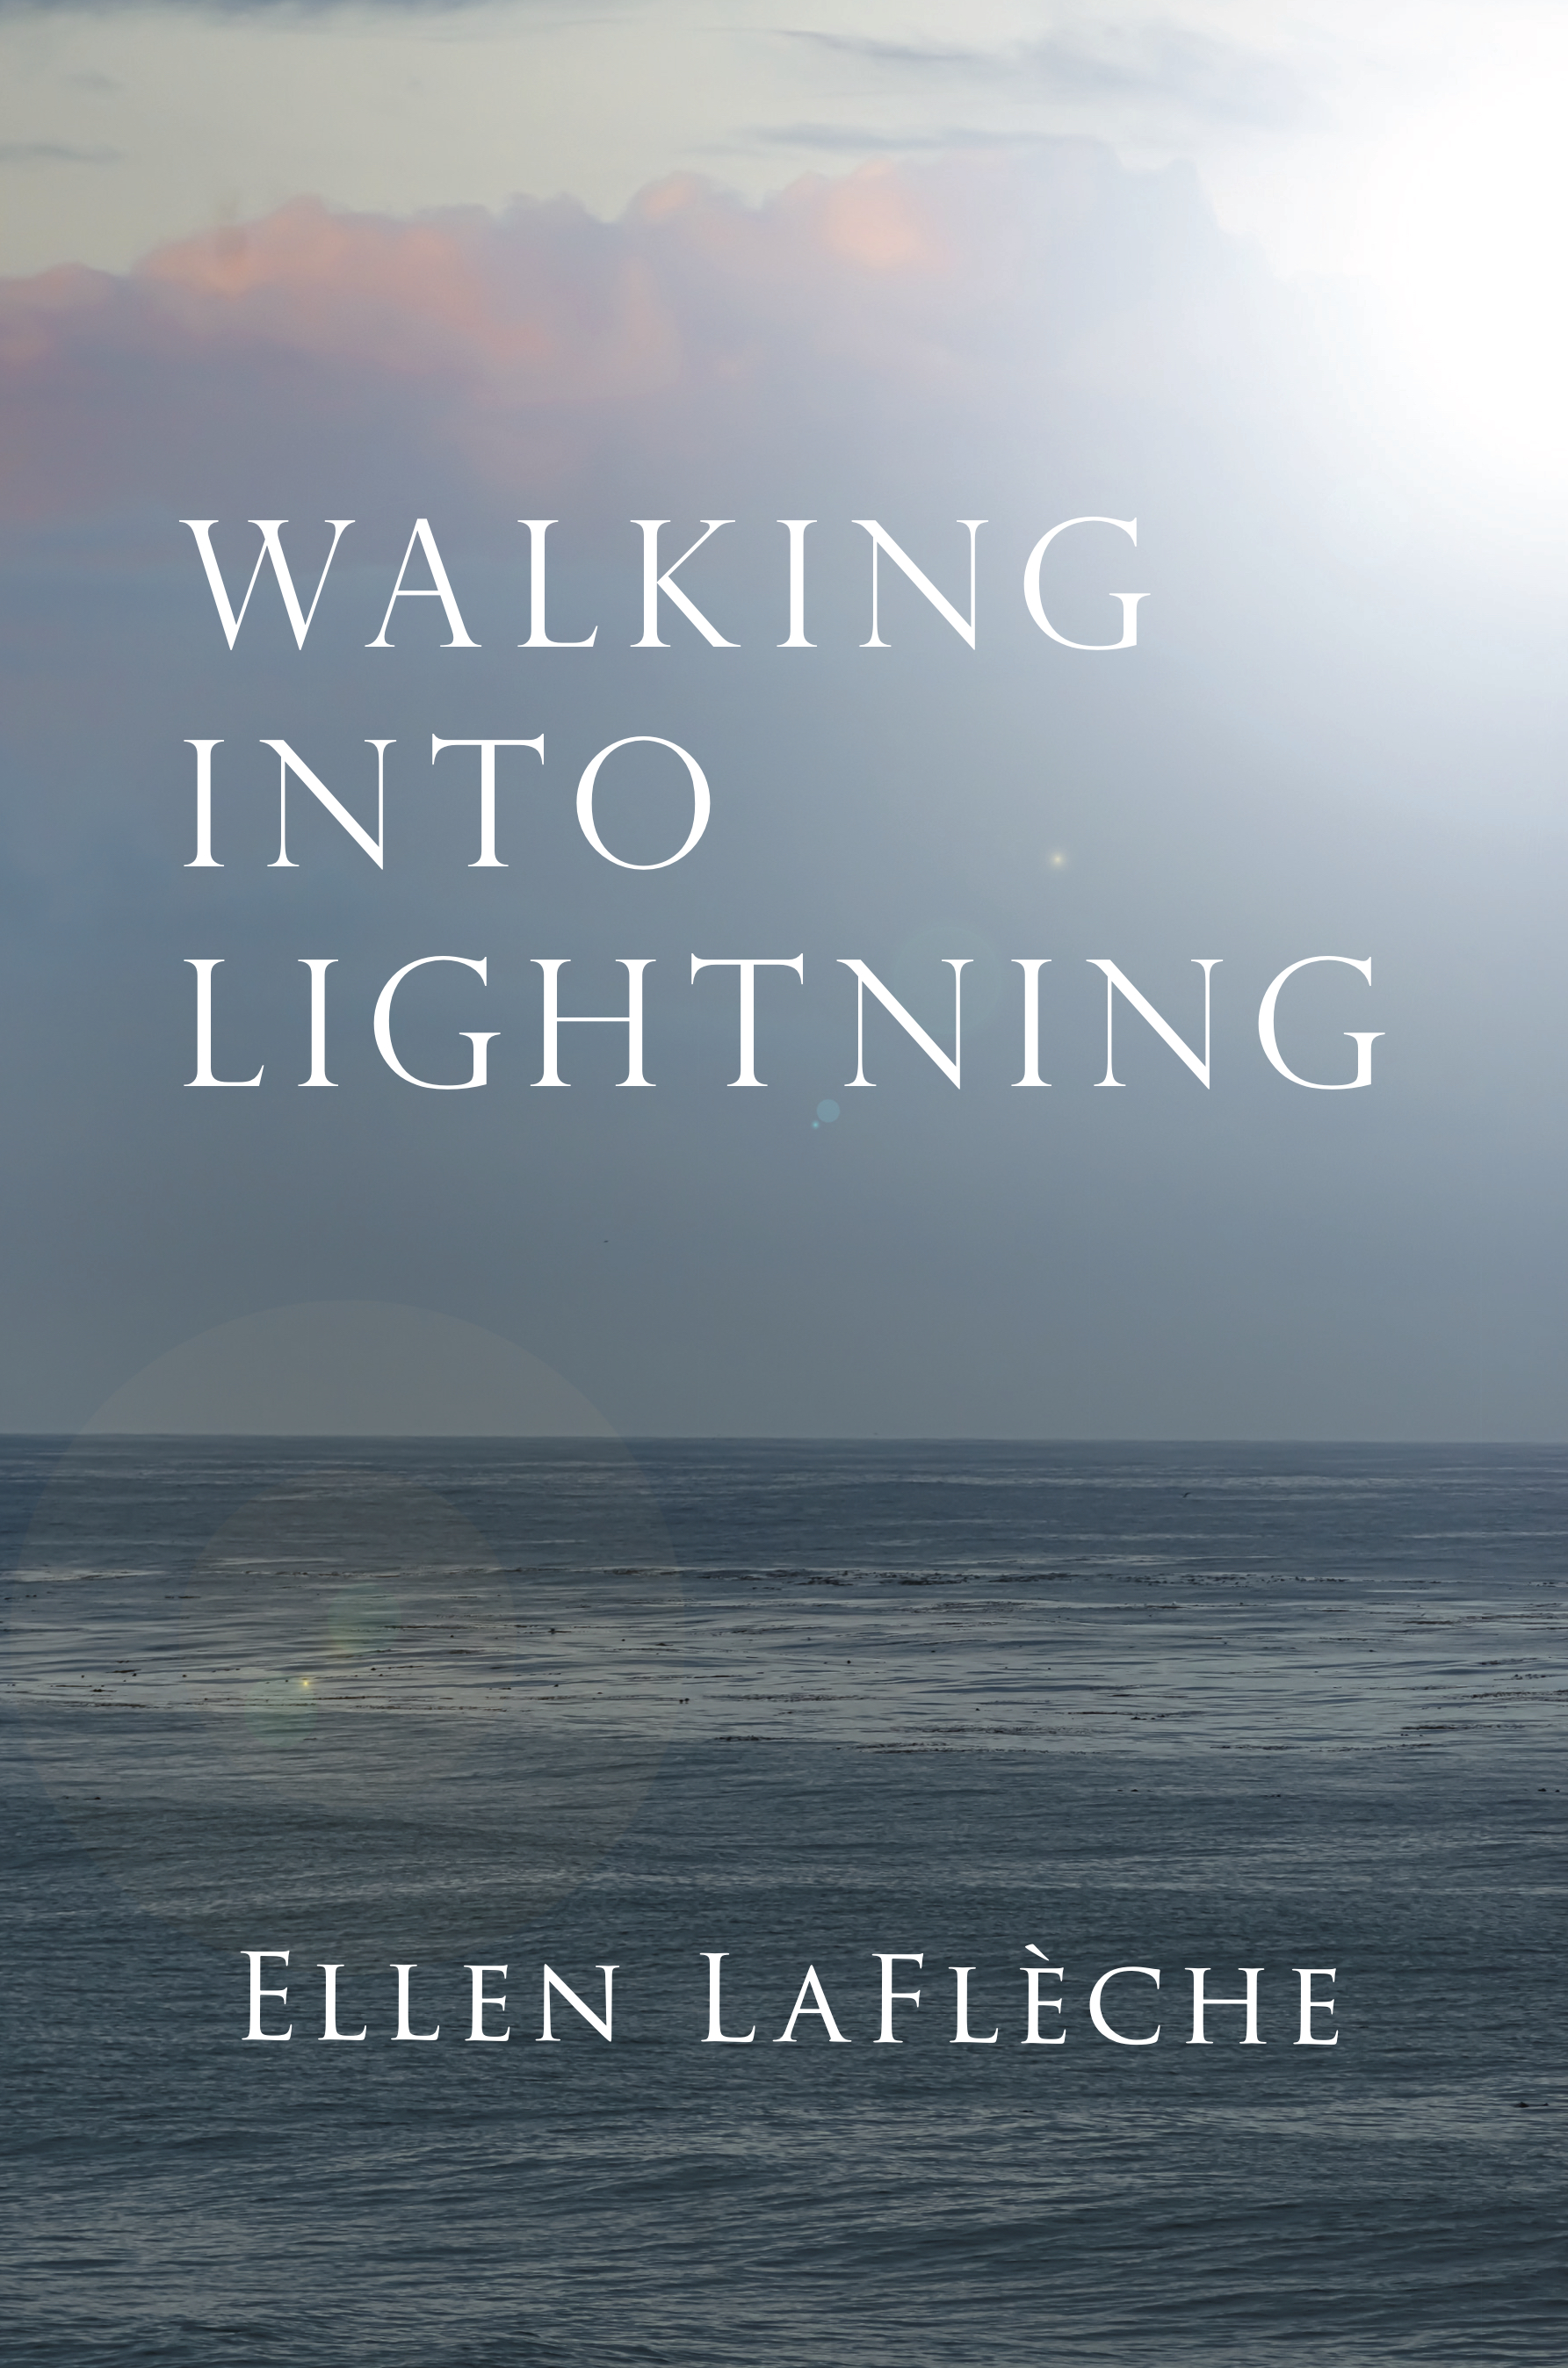 Walking into Lightning - Ellen LaFleche poetry reading and book launch